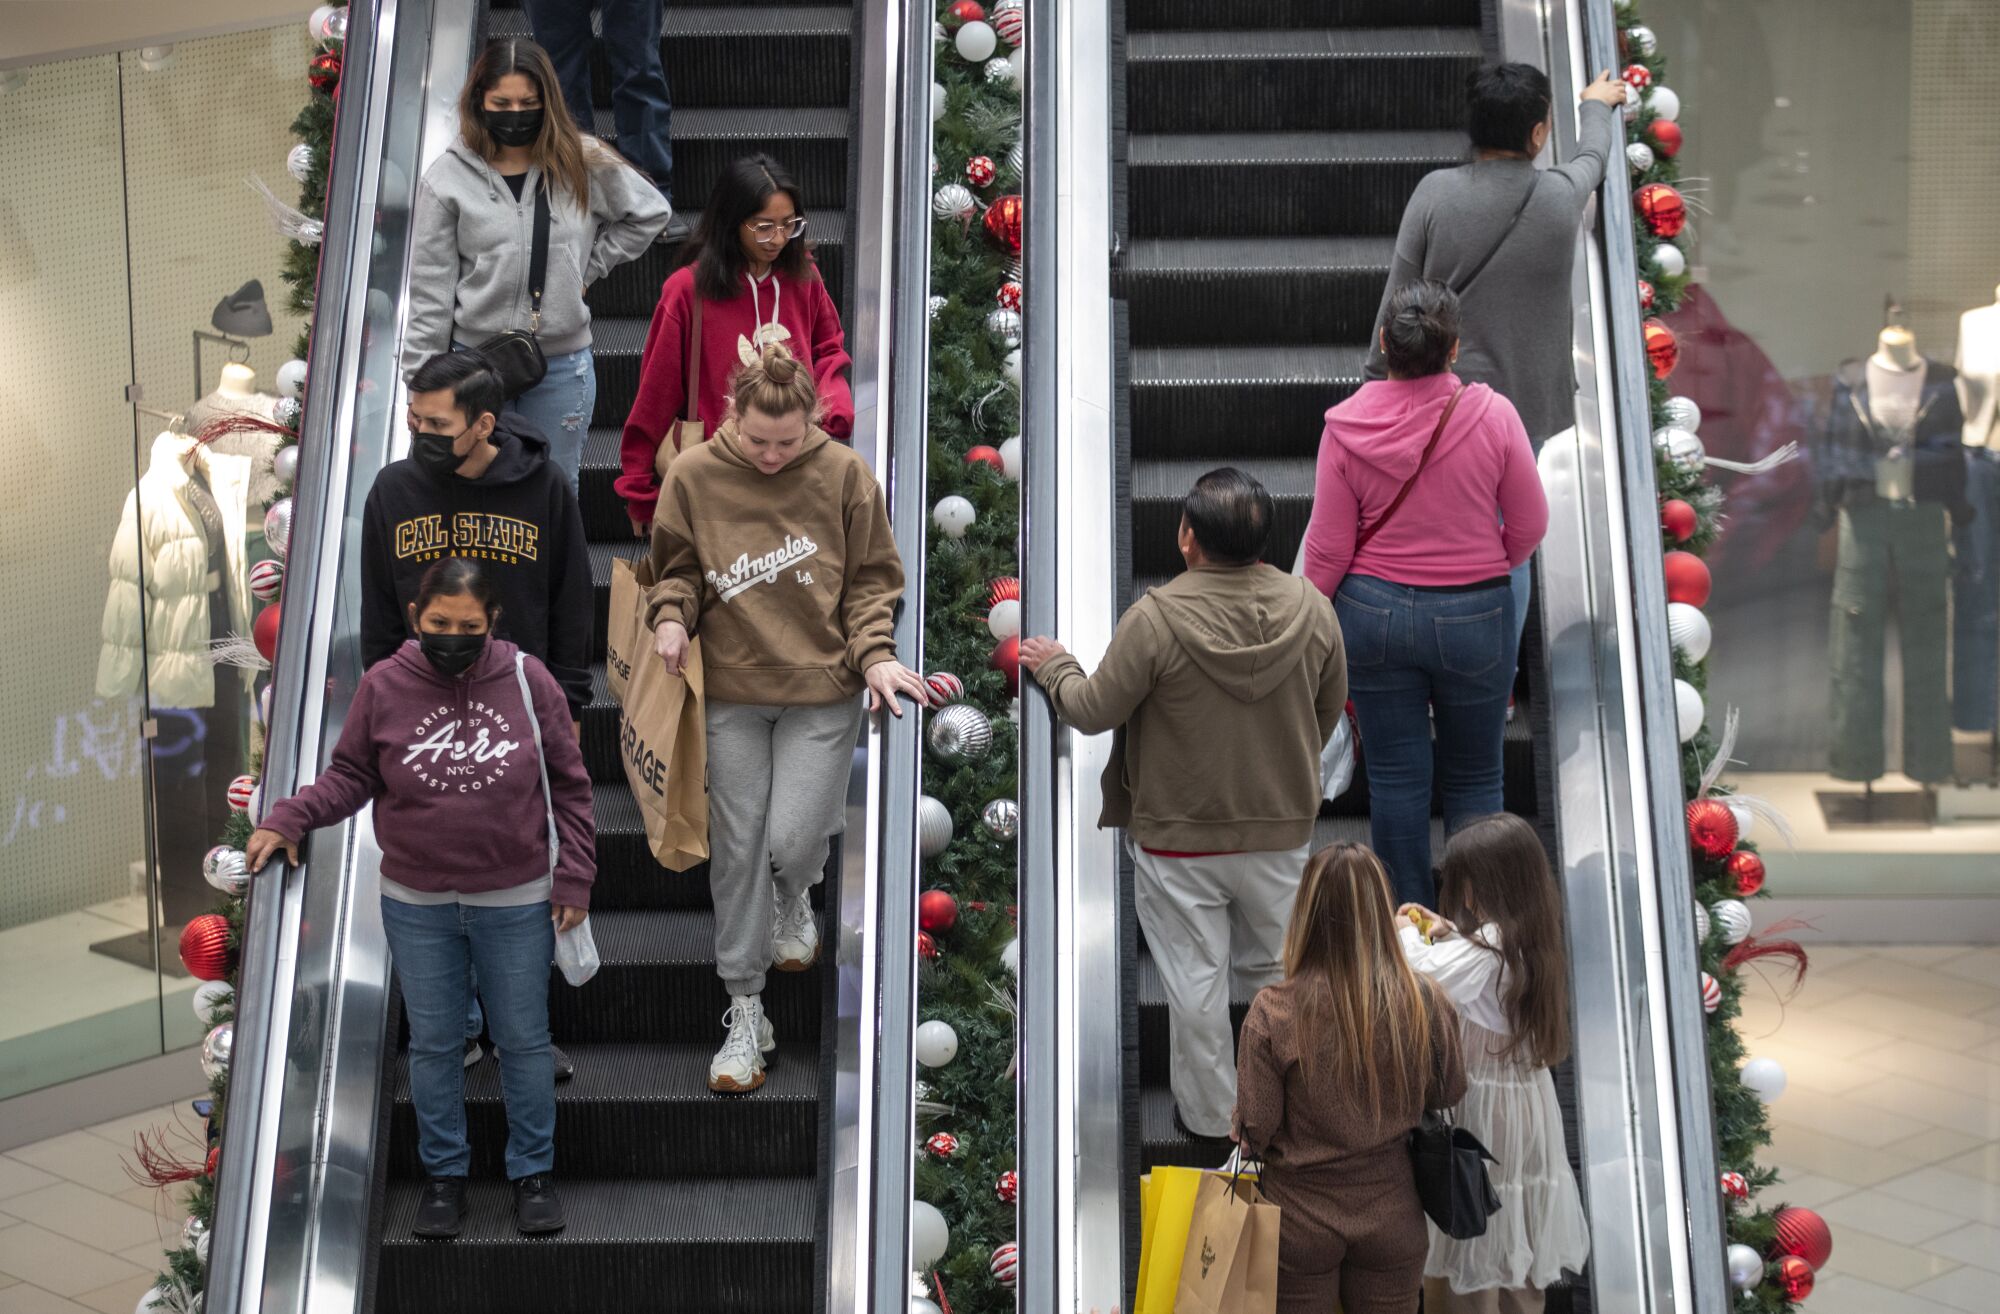 Black Friday shoppers ride the escalator at the Glendale Galleria.